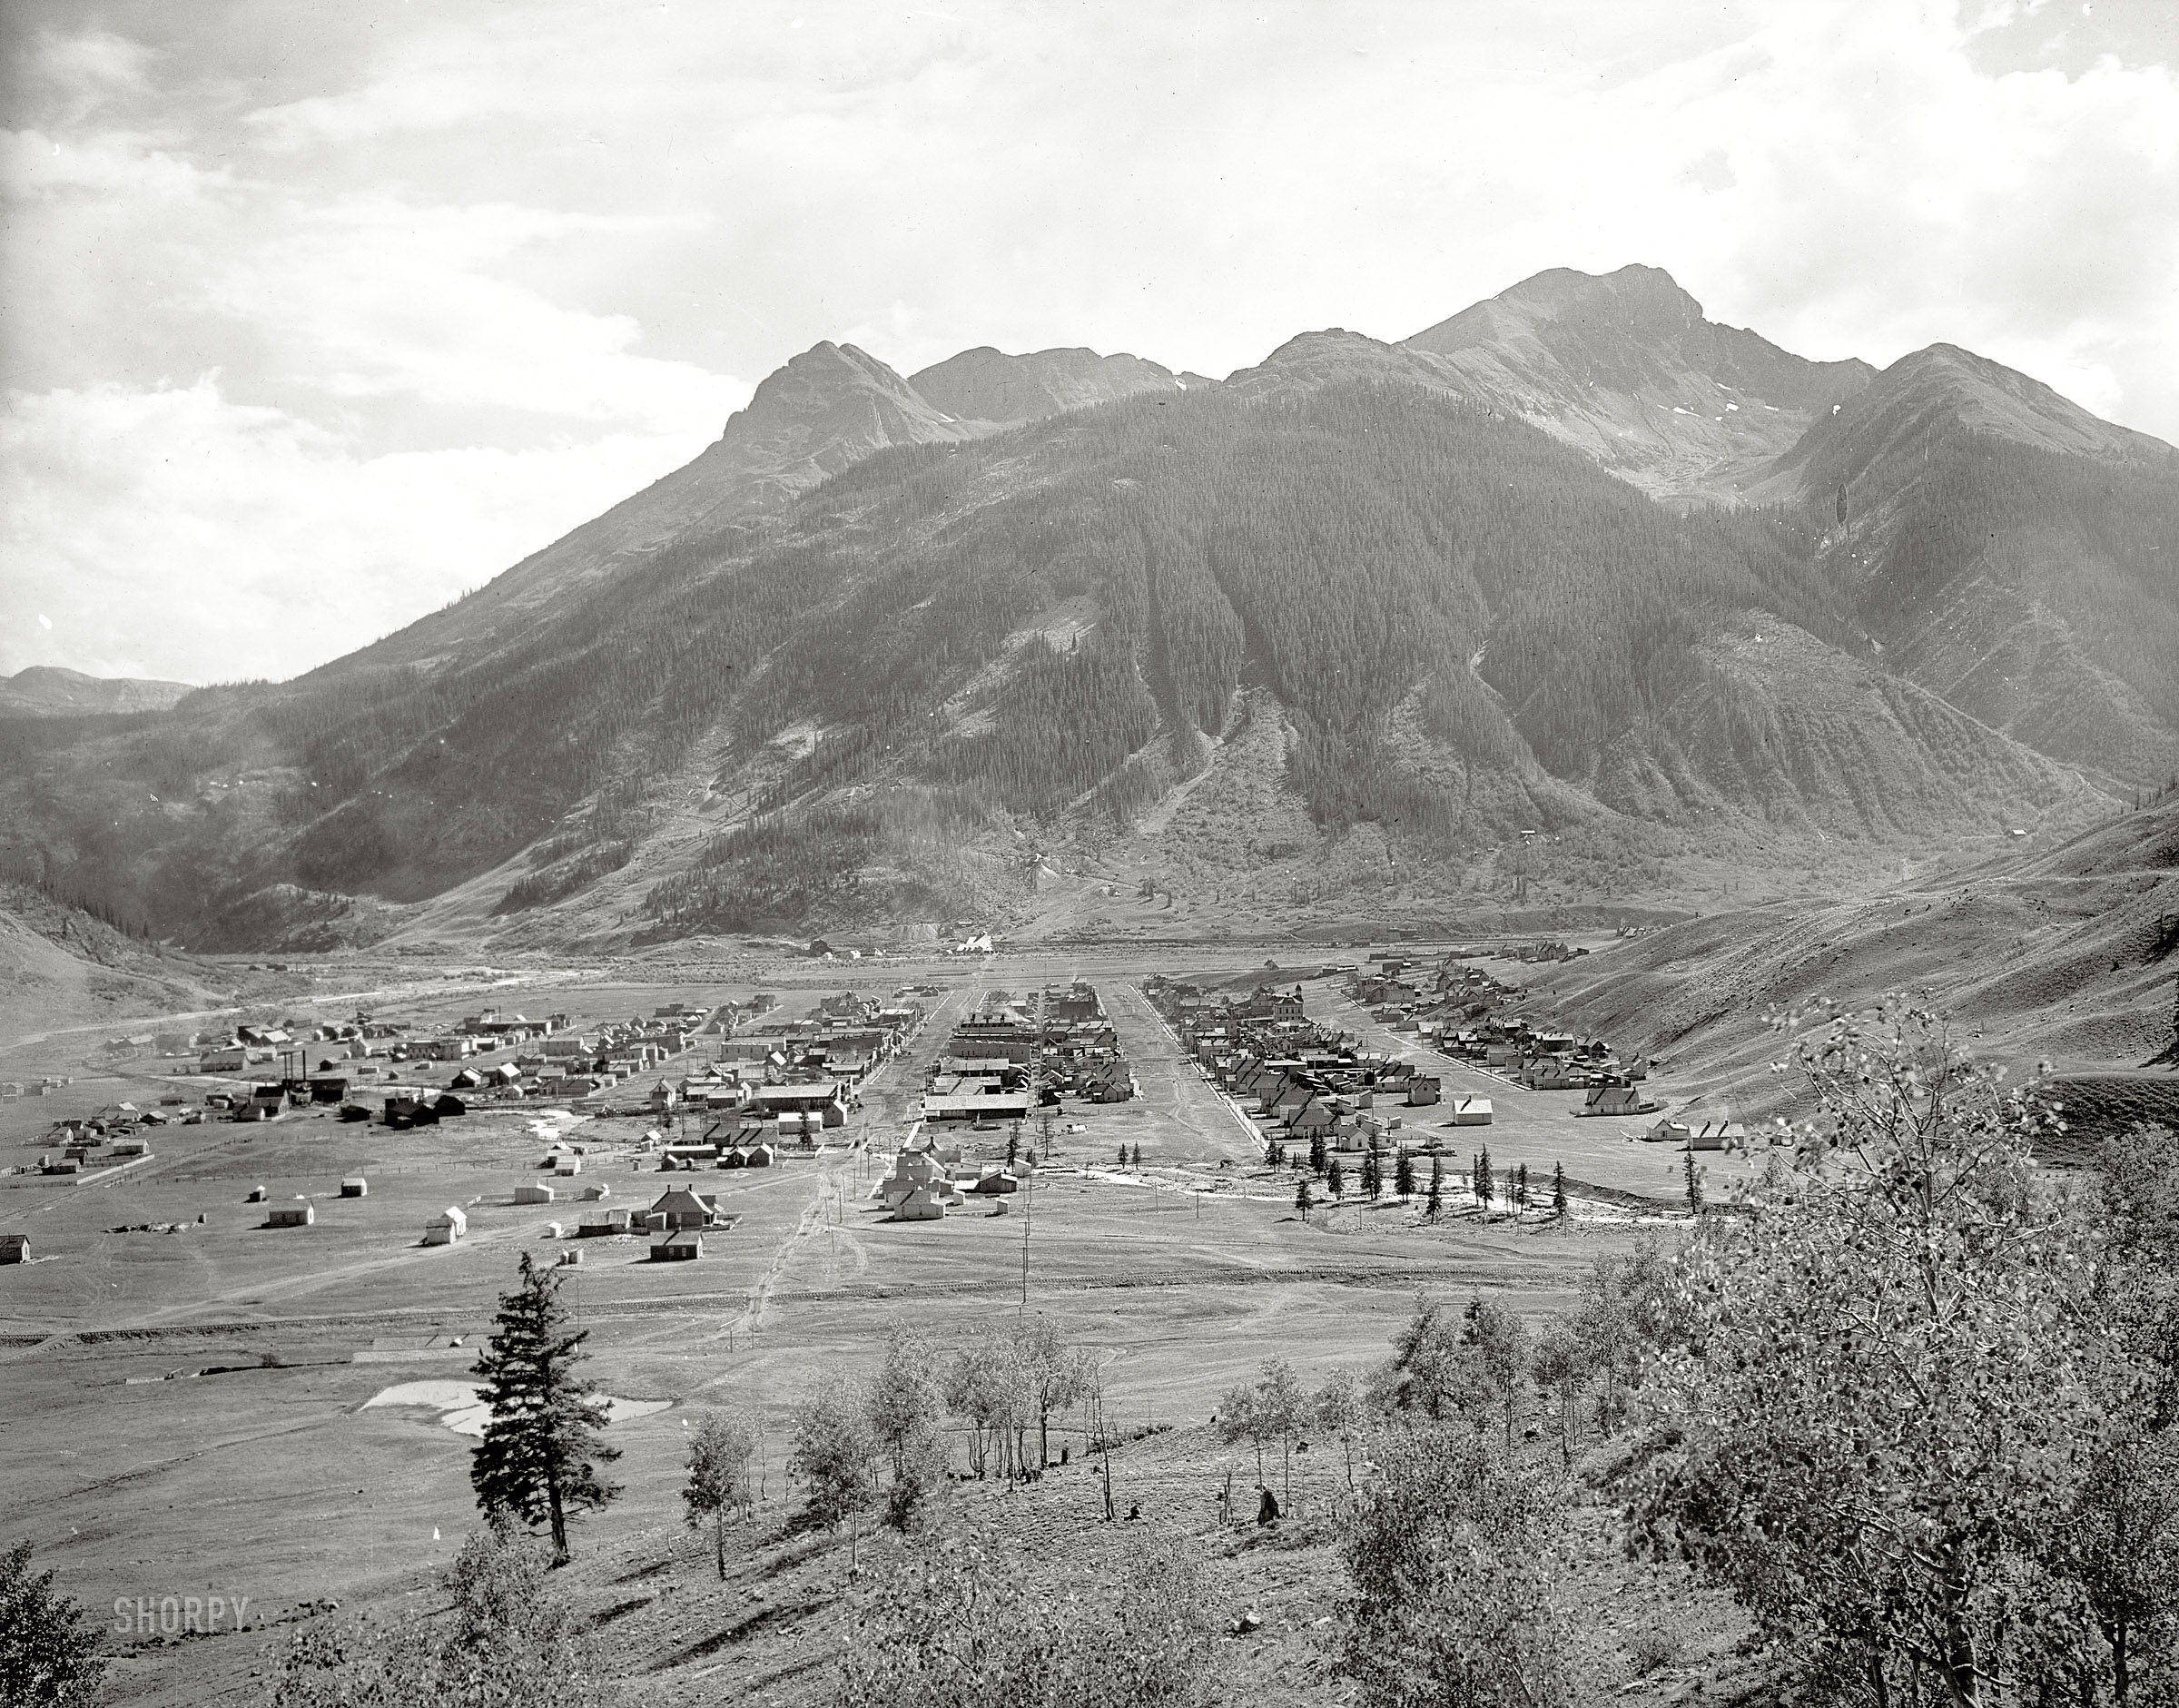 Silverton, Colorado, circa 1901 as photographed by William Henry Jackson. 8x10 inch dry plate glass negative, Detroit Publishing Company. View full size.